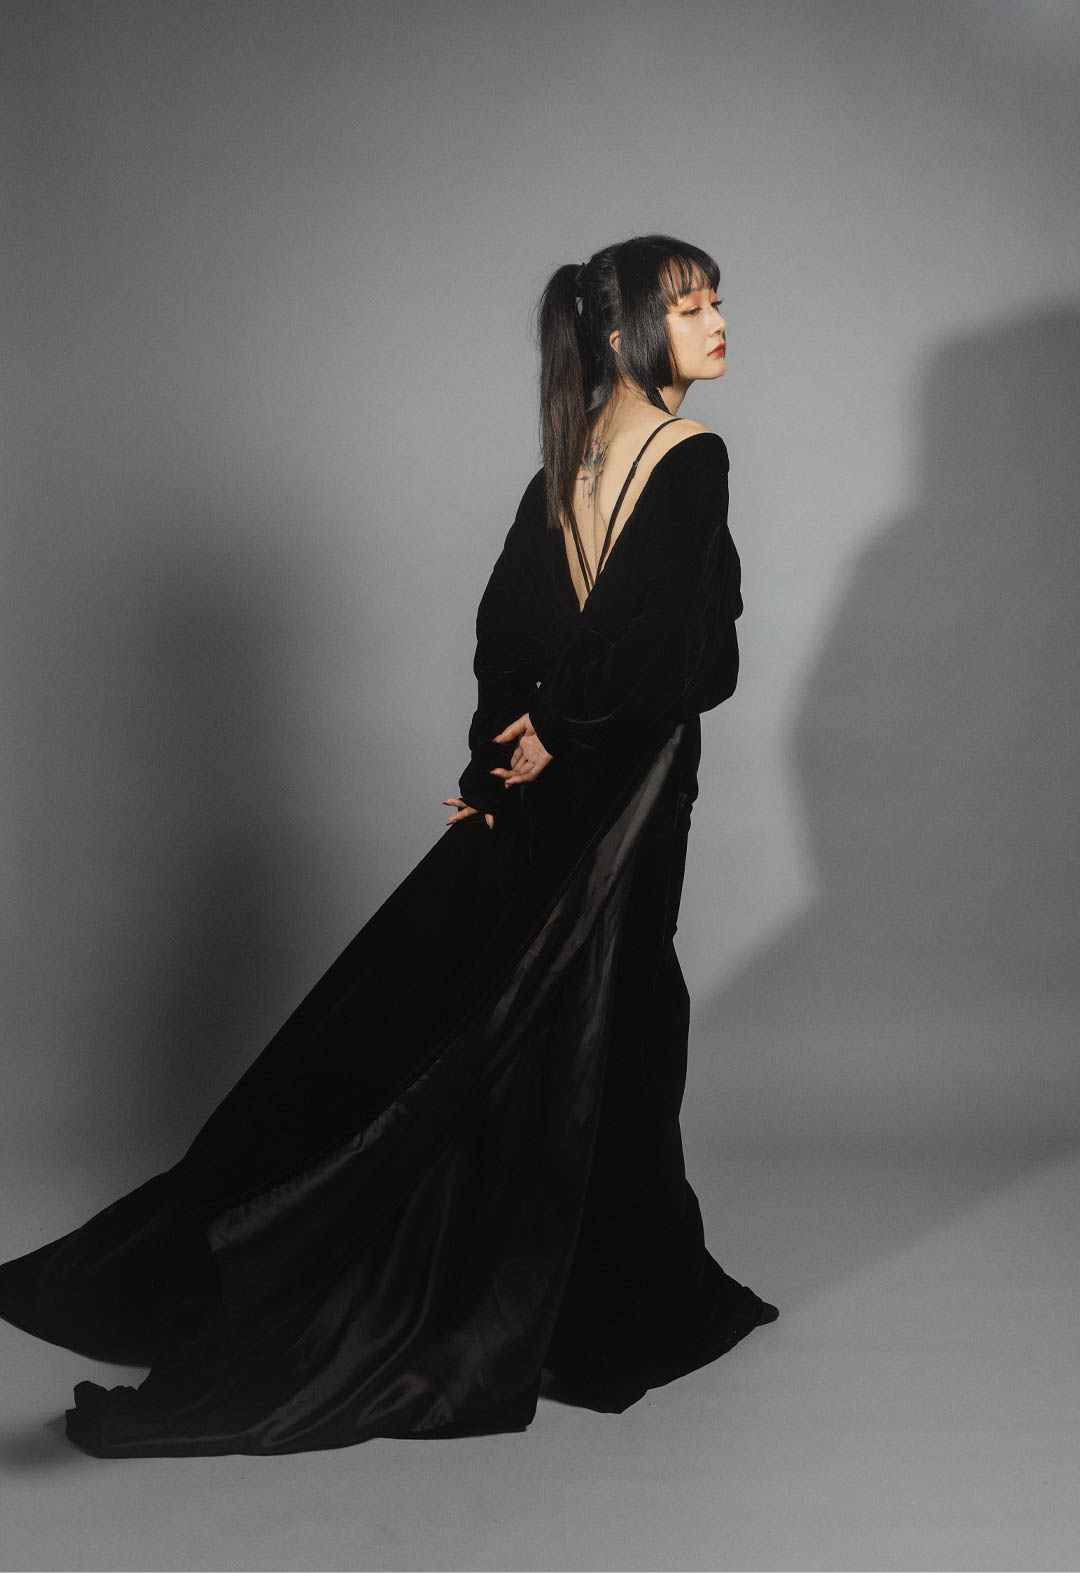 This black velvet dress has a V-shaped open back and narrow straps on each shoulder for support. The dress is long, with a train that flows behind the wearer. The background in the image is gray.